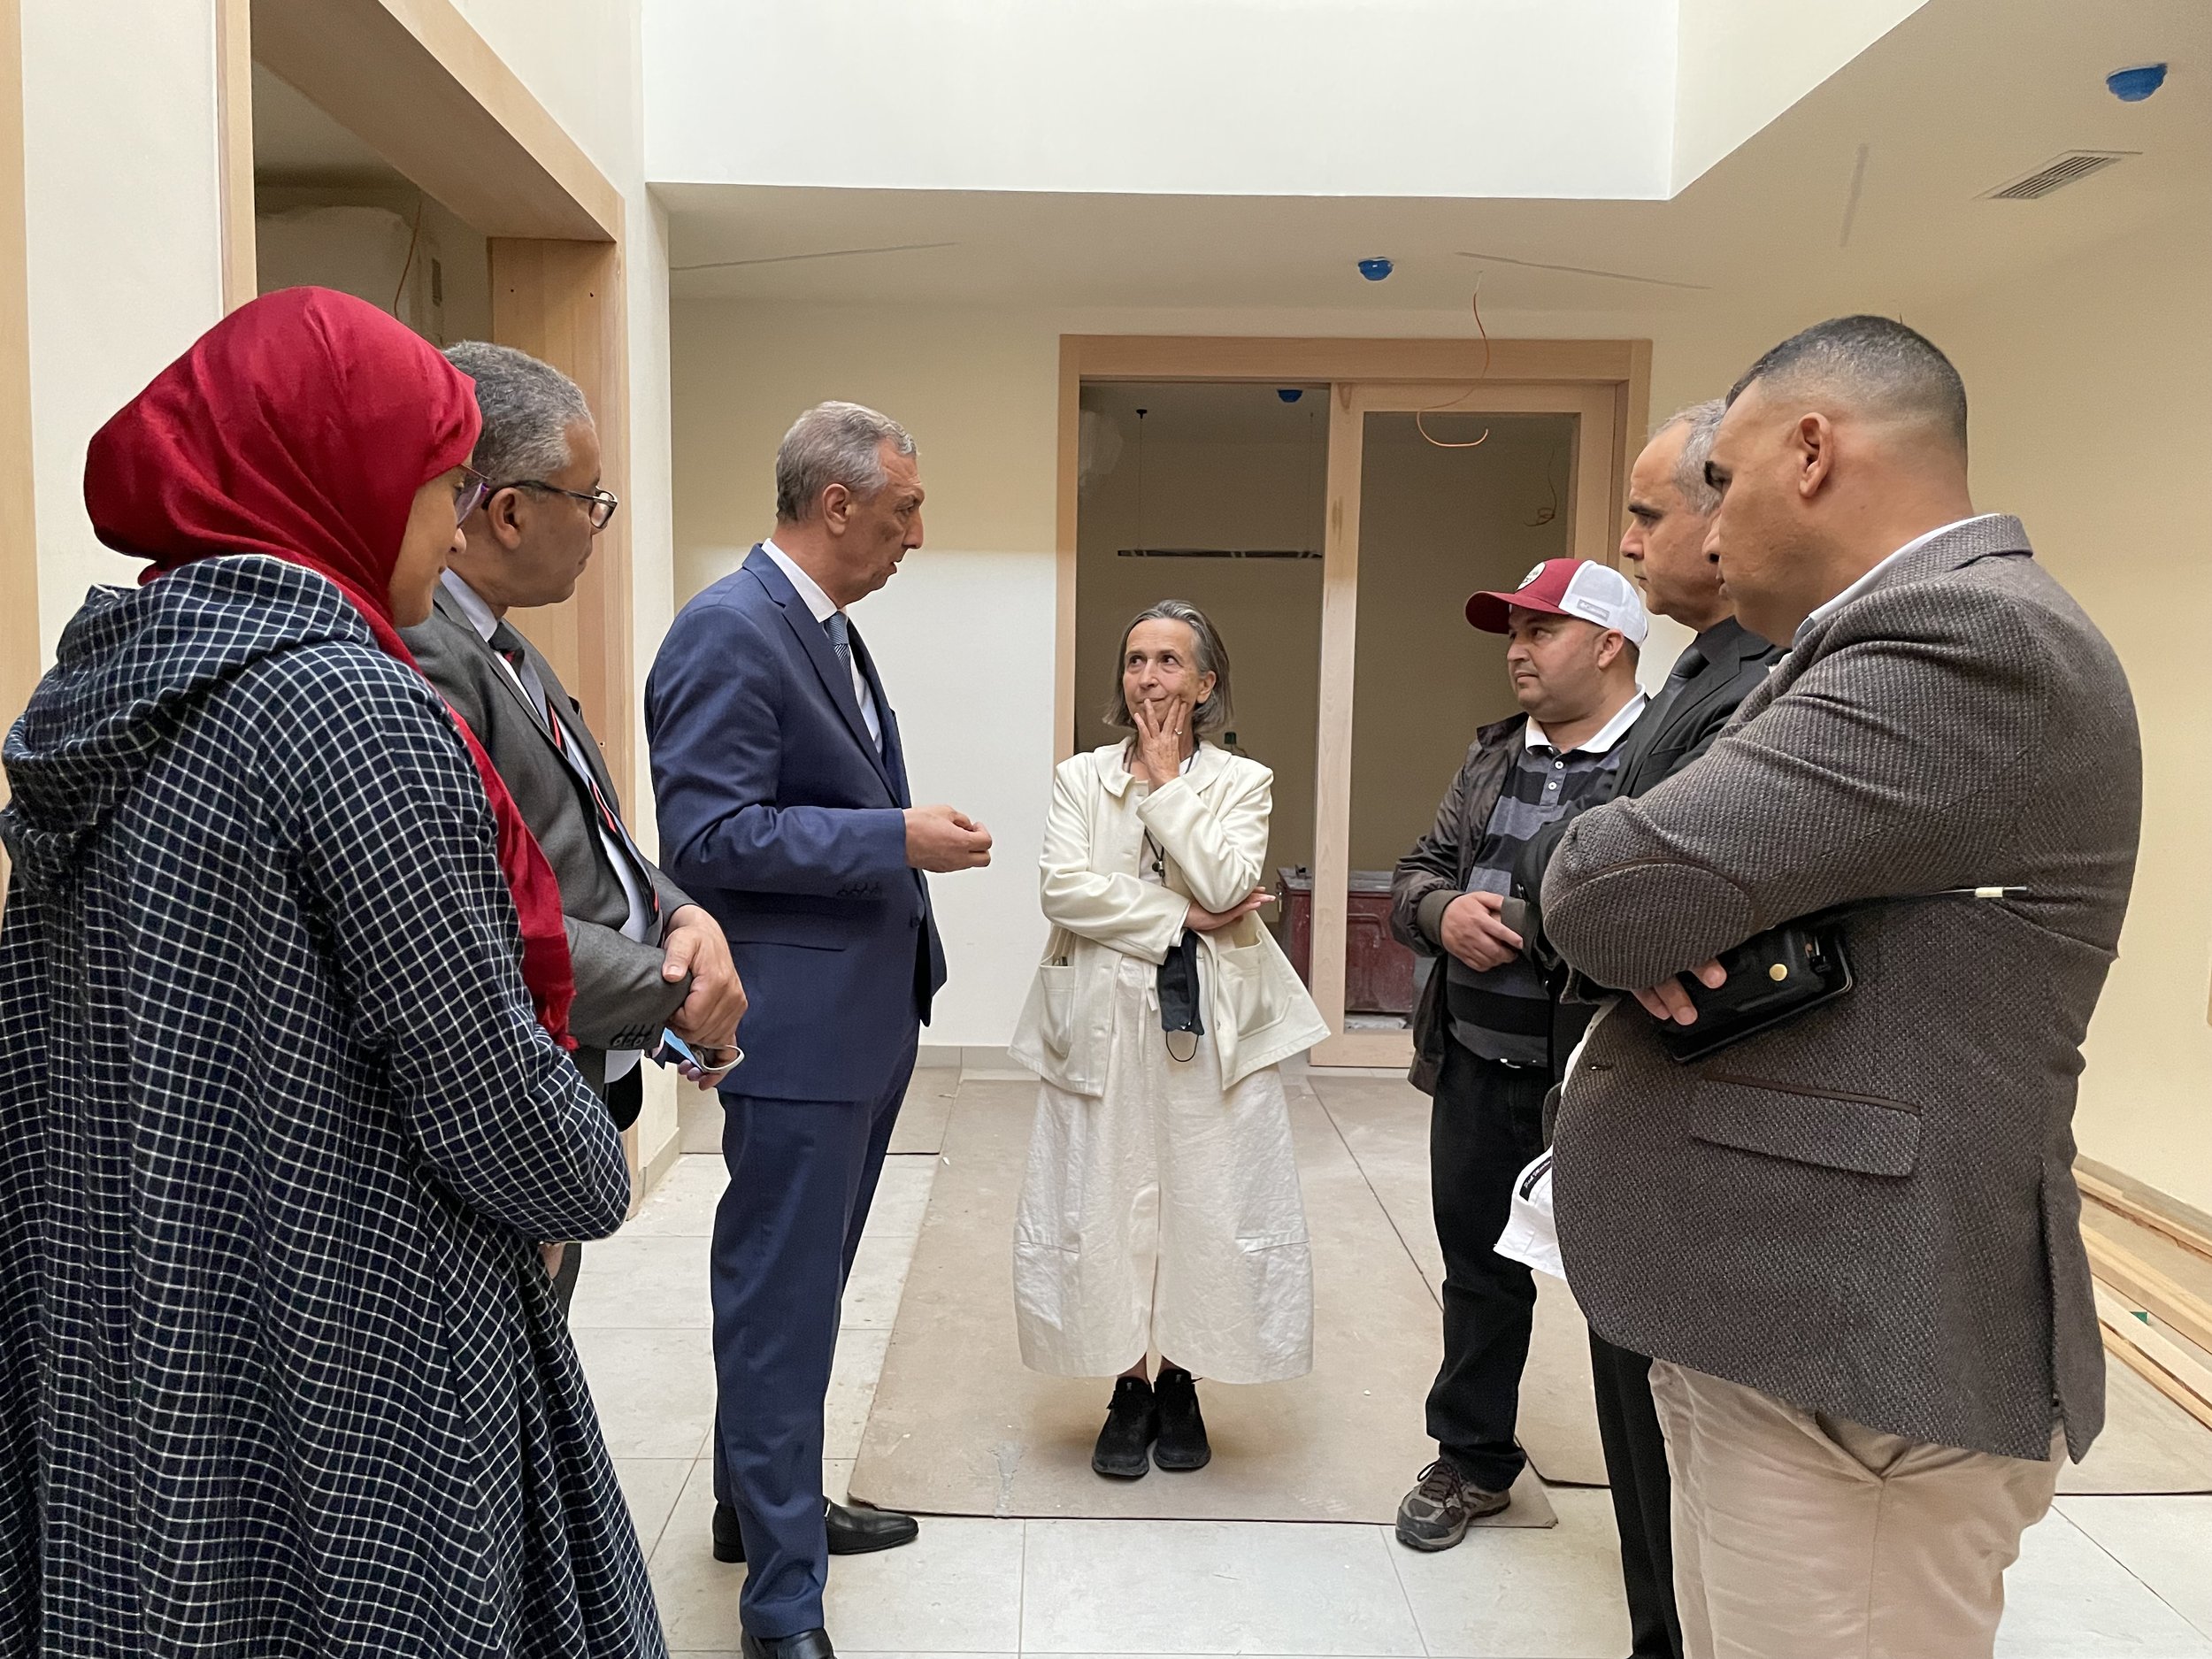 The delegation with The Wali of the region Marrakech-Safi visiting our new extension building for Alnour Association which will be completed in March